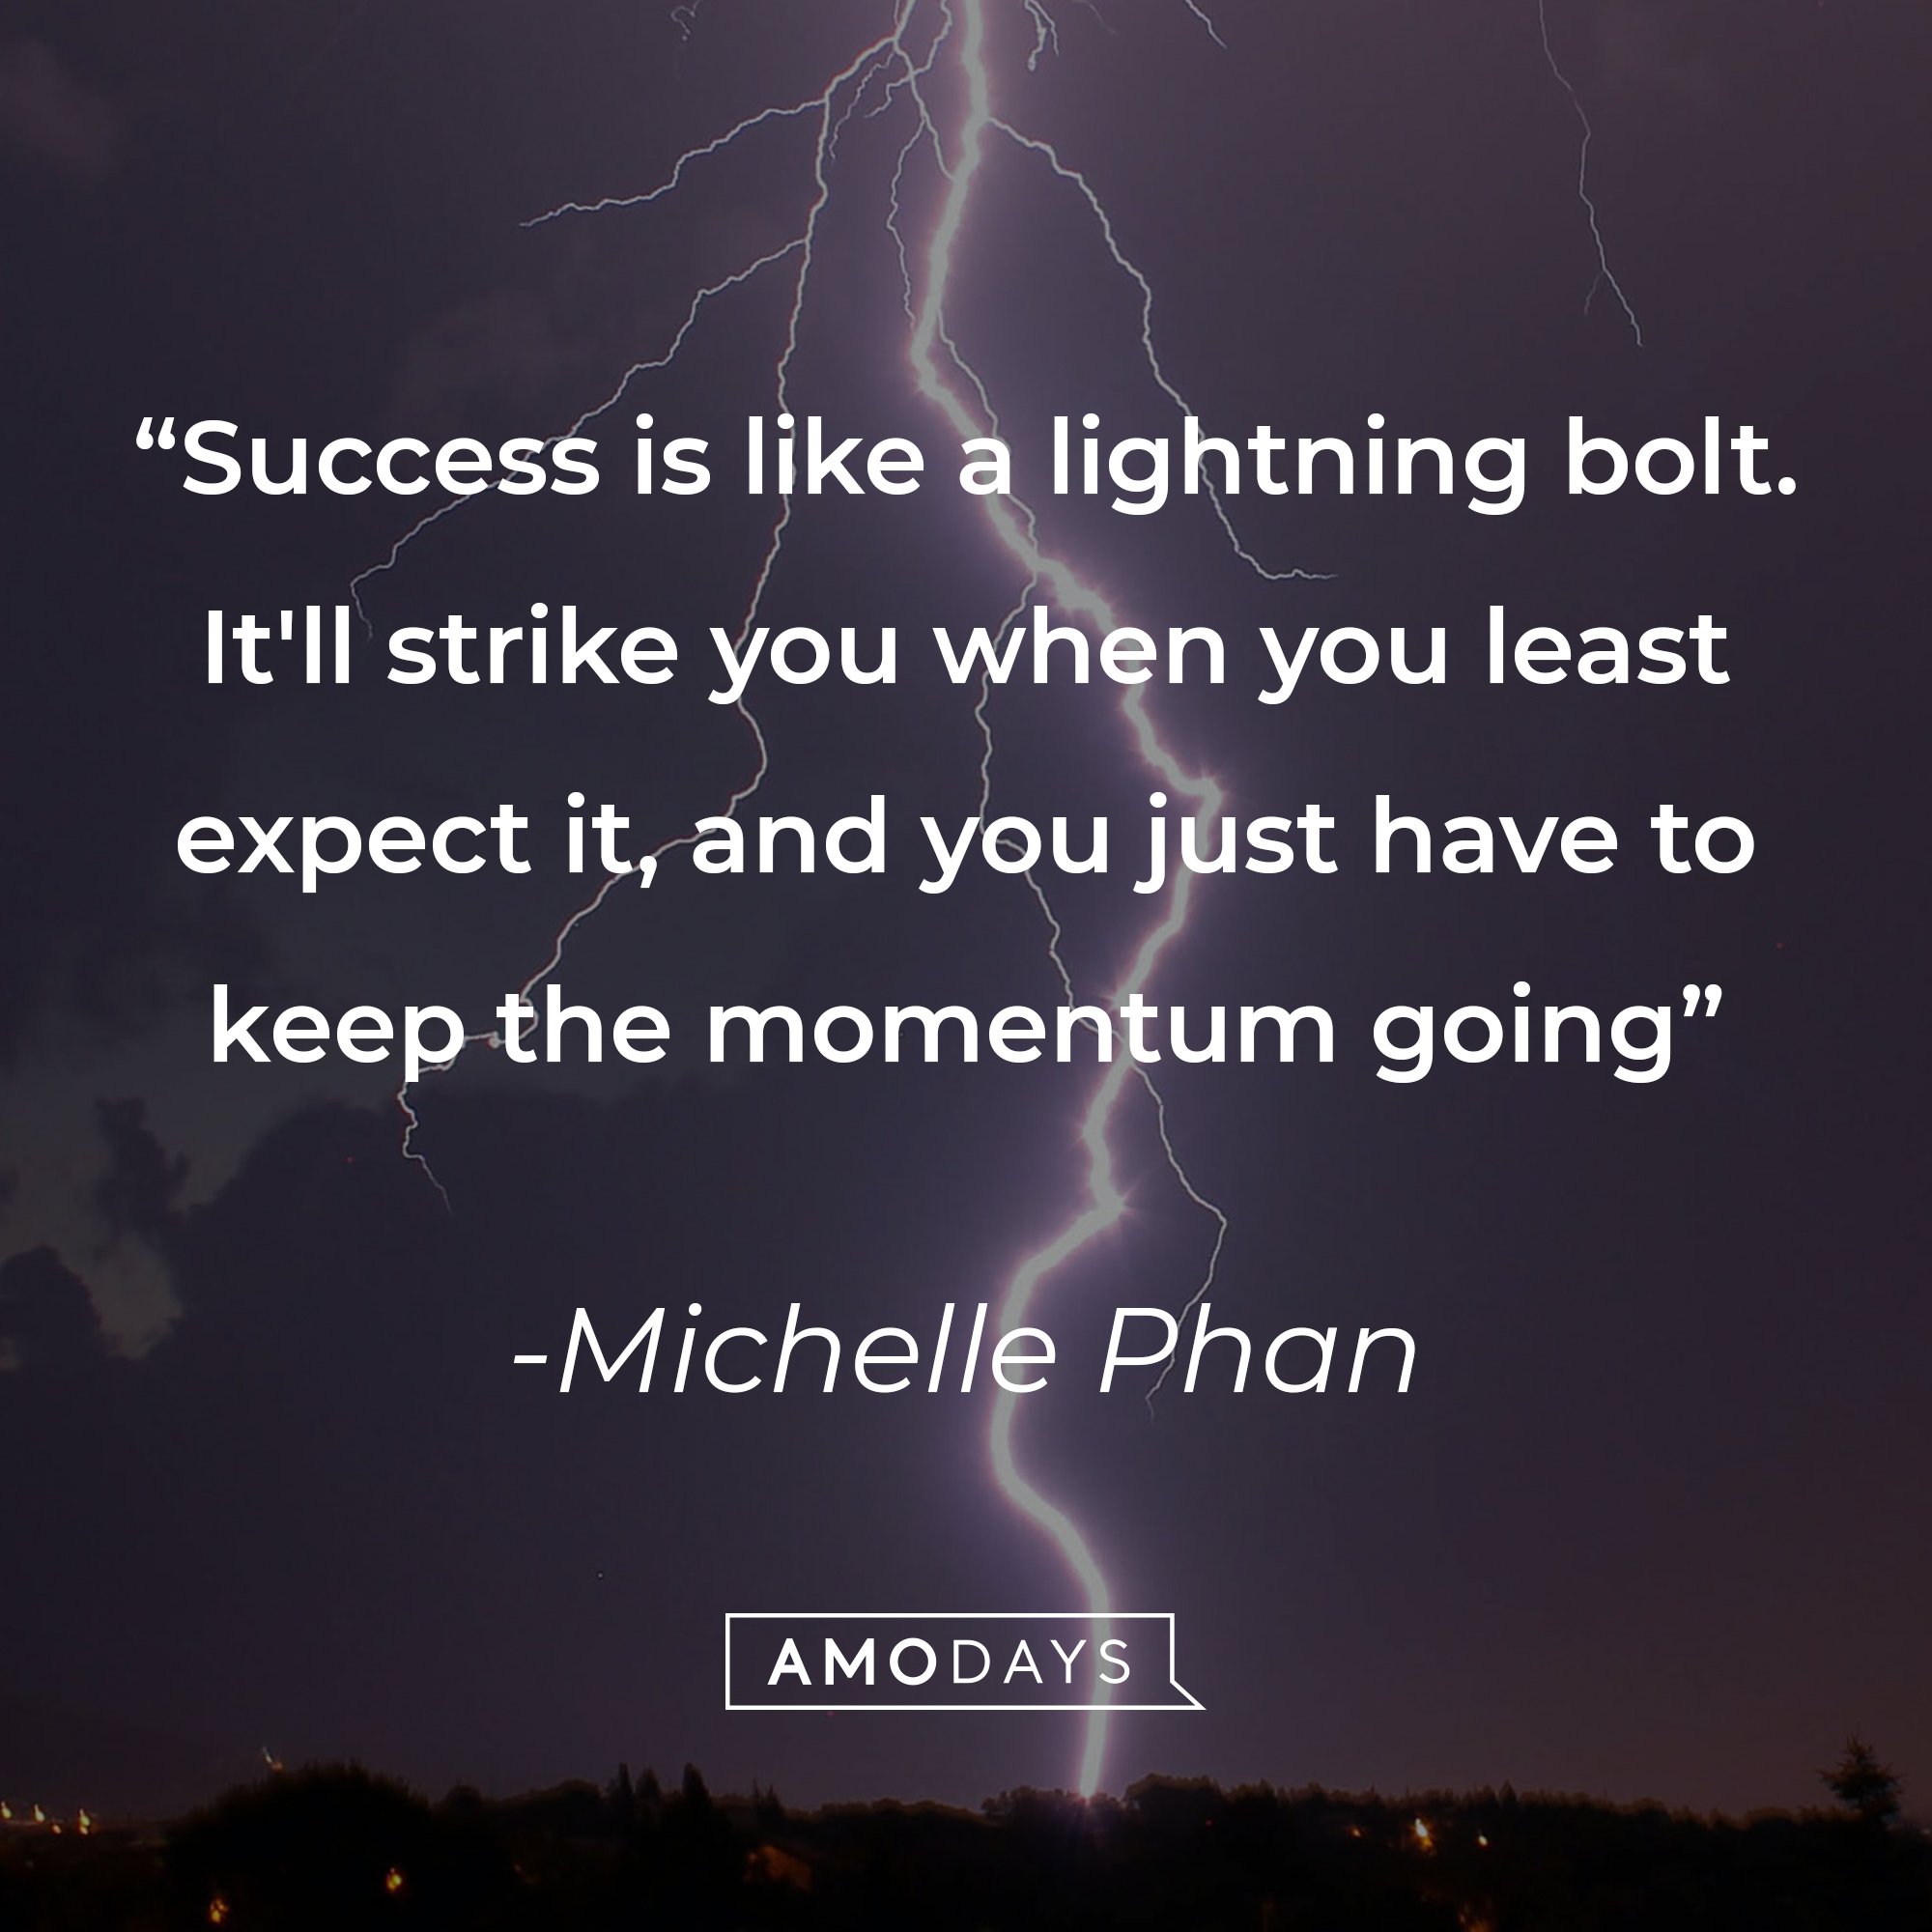 Michelle Phan’s quote: "Success is like a lightning bolt. It'll strike you when you least expect it, and you just have to keep the momentum going." | Image: AmoDays  